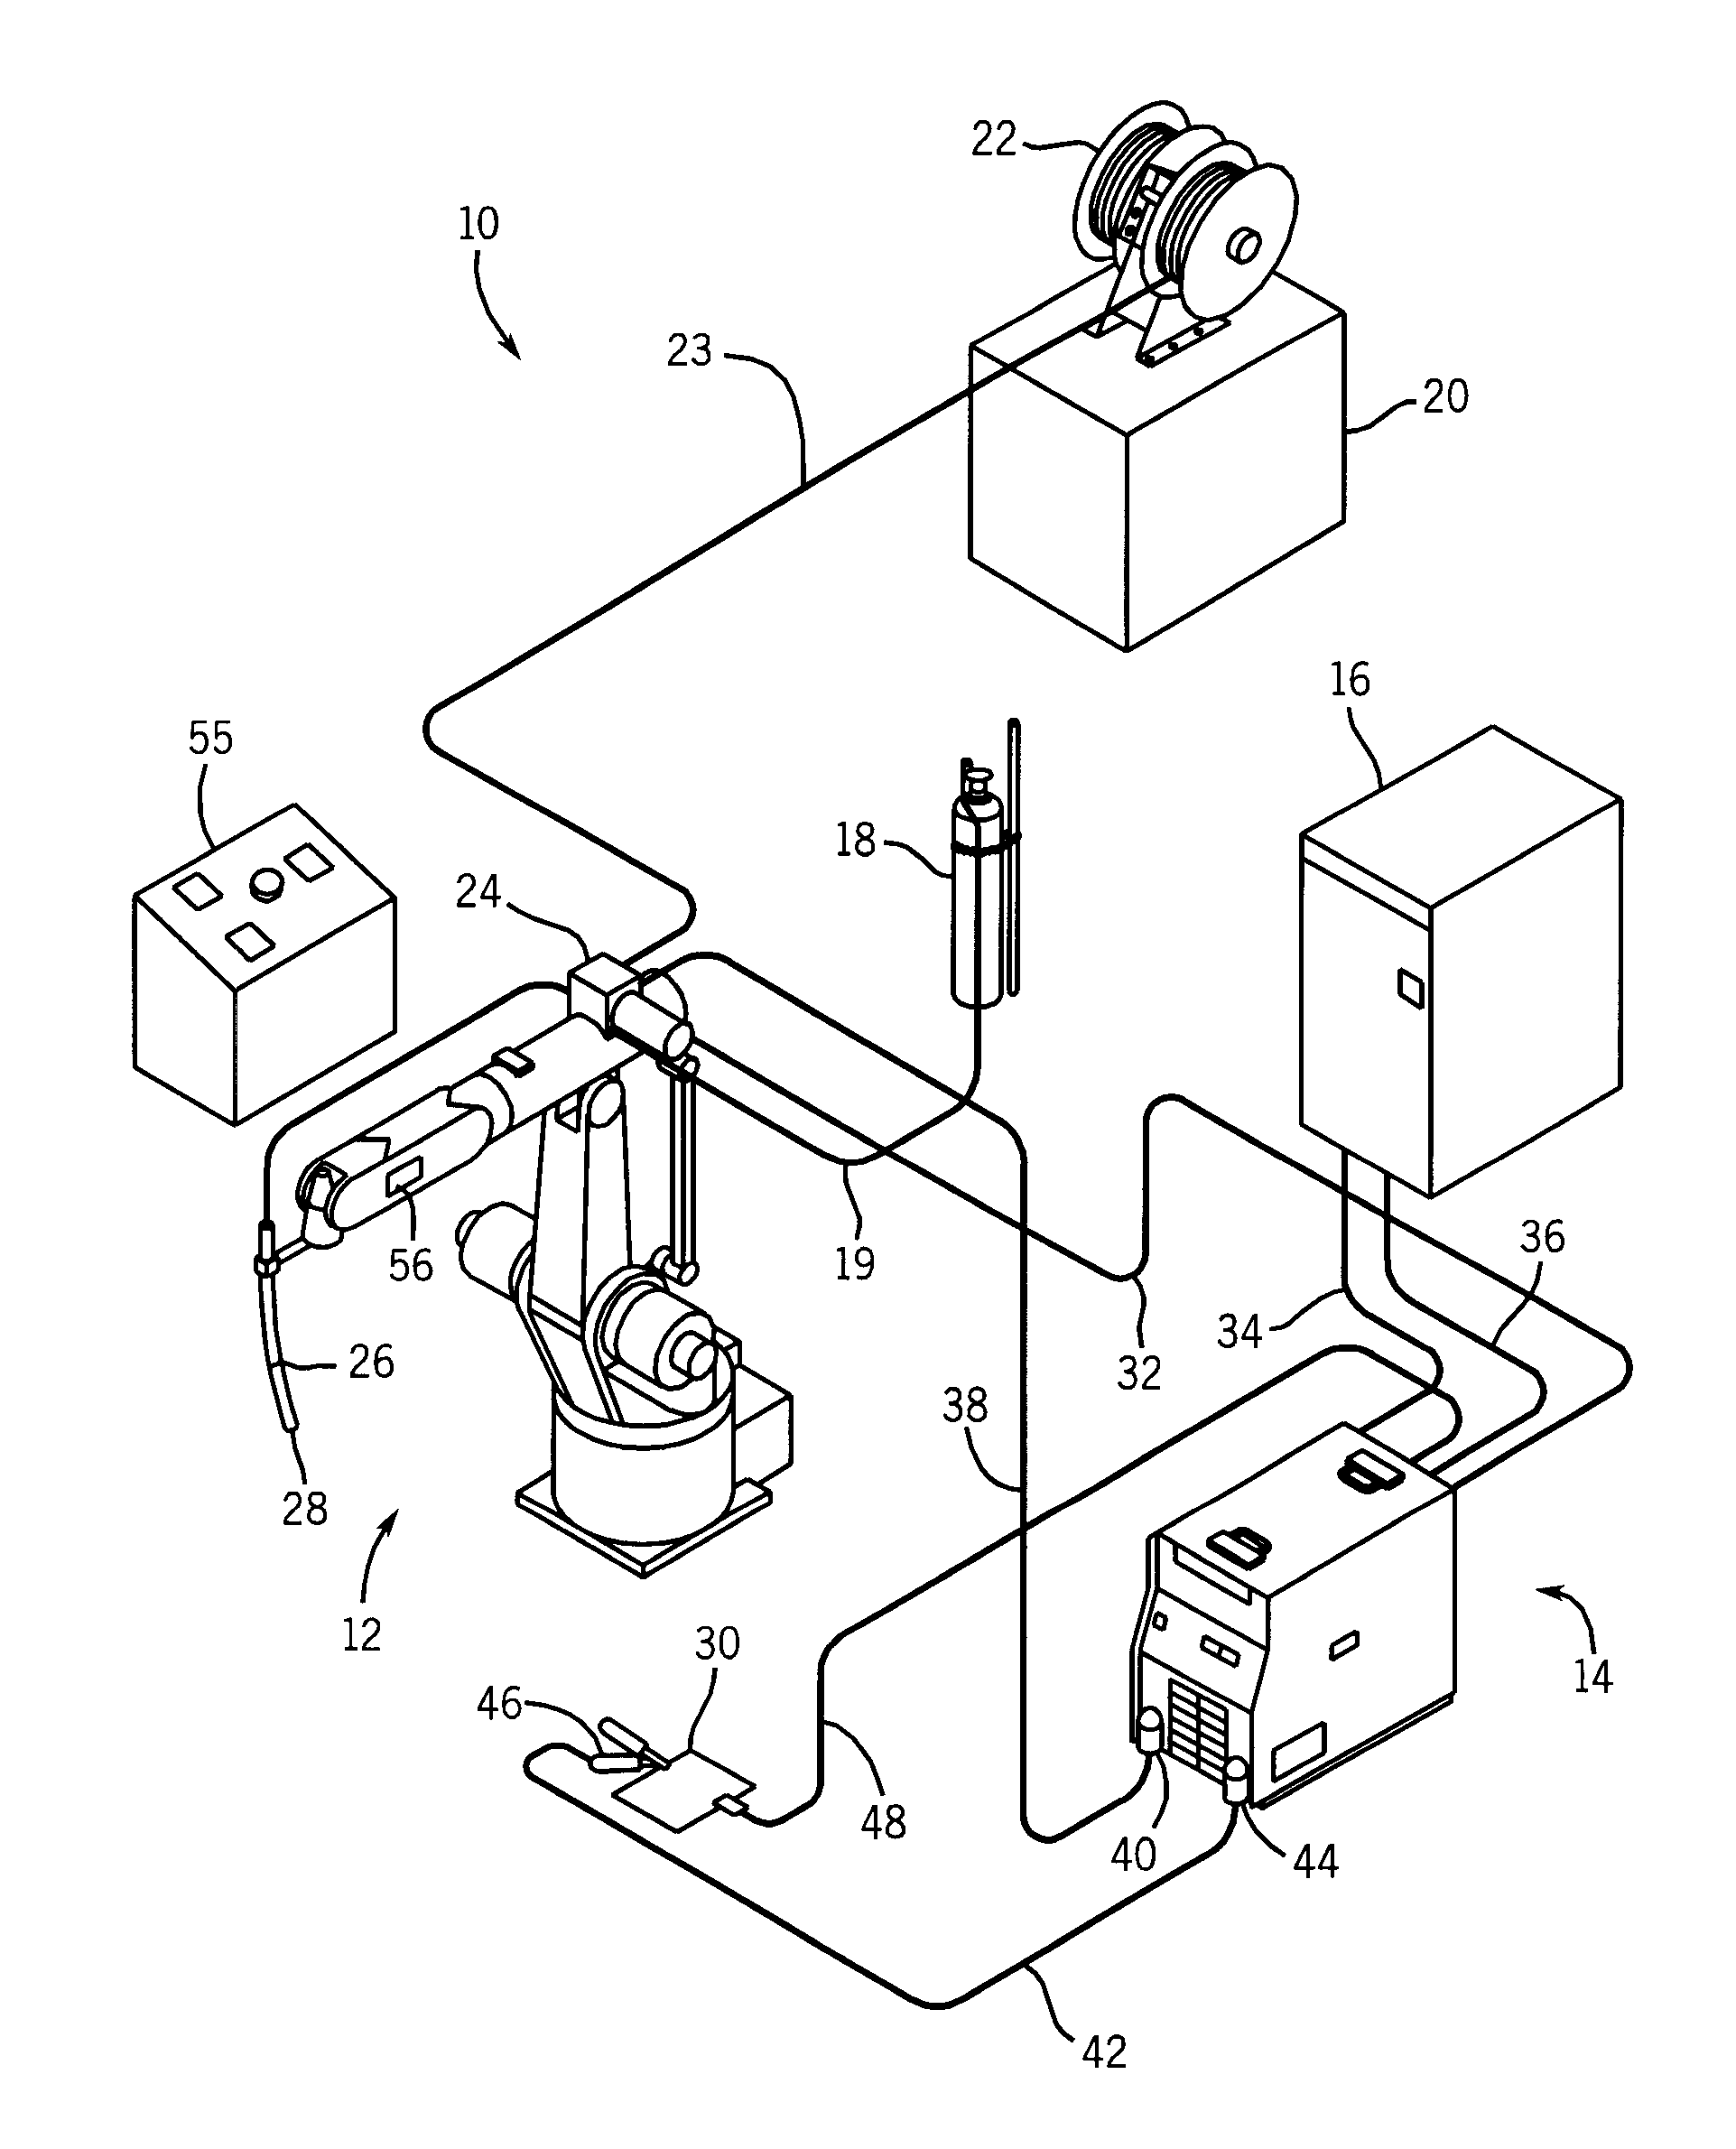 System and method for identifying welding consumable wear